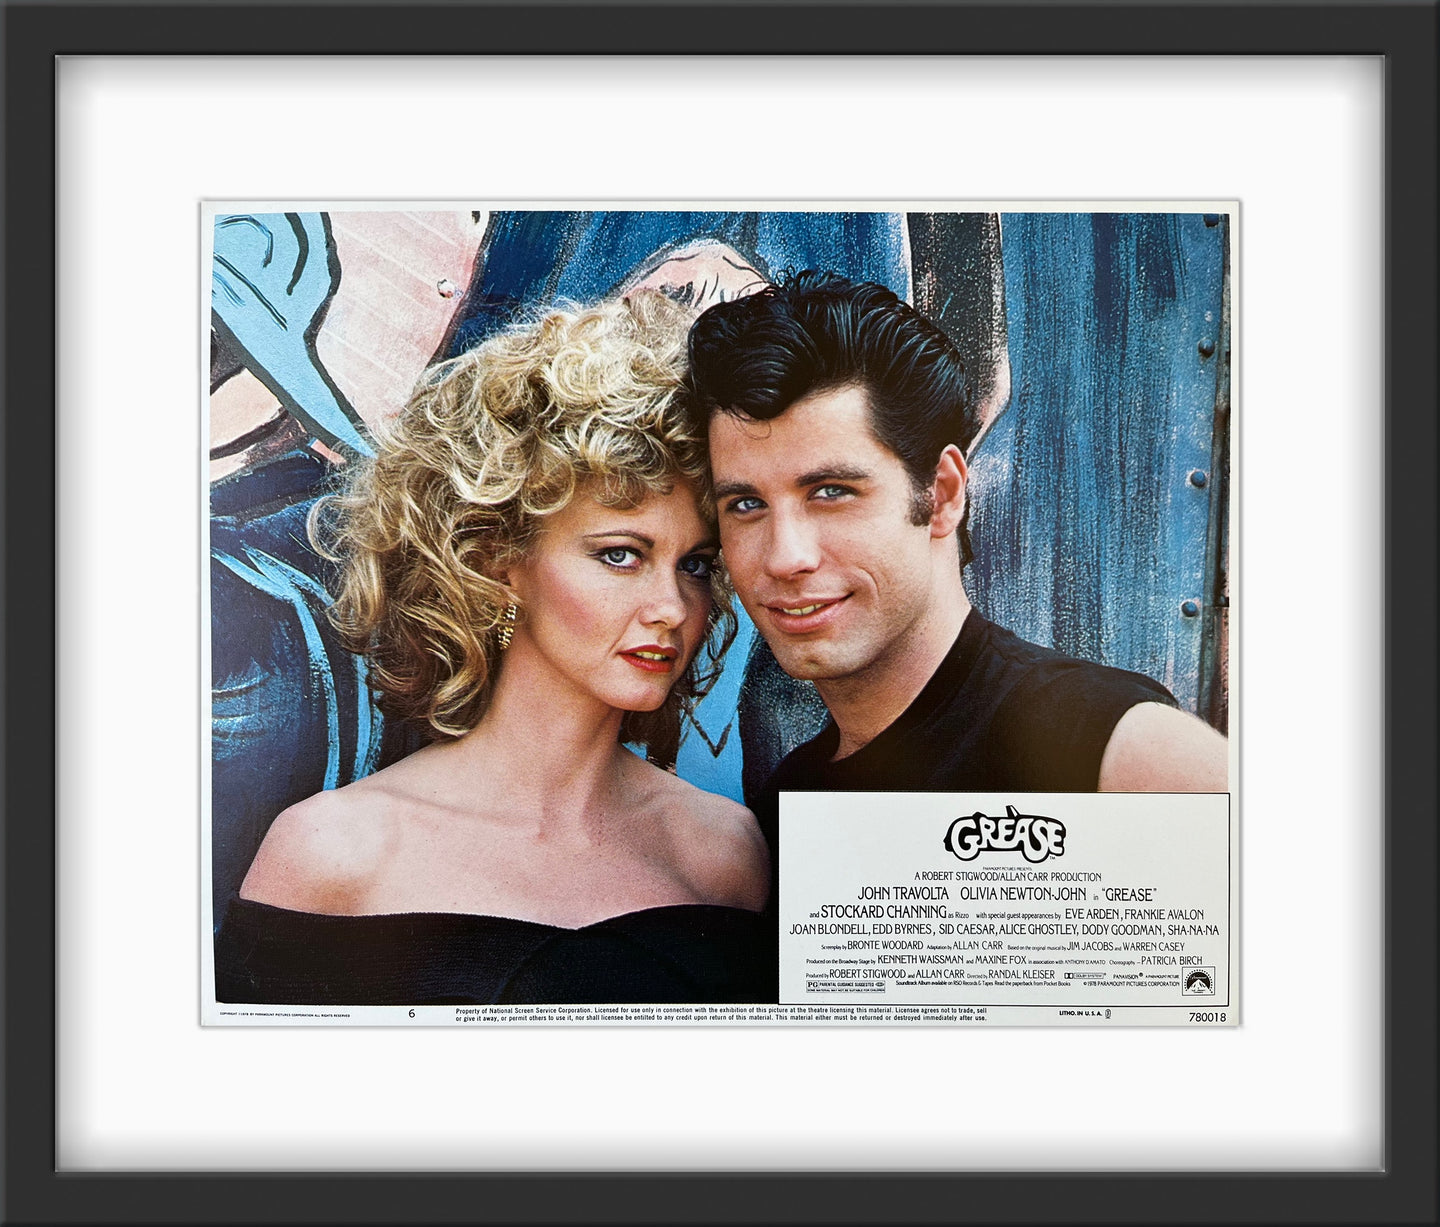 An original U.S. lobby card for the musical film Grease